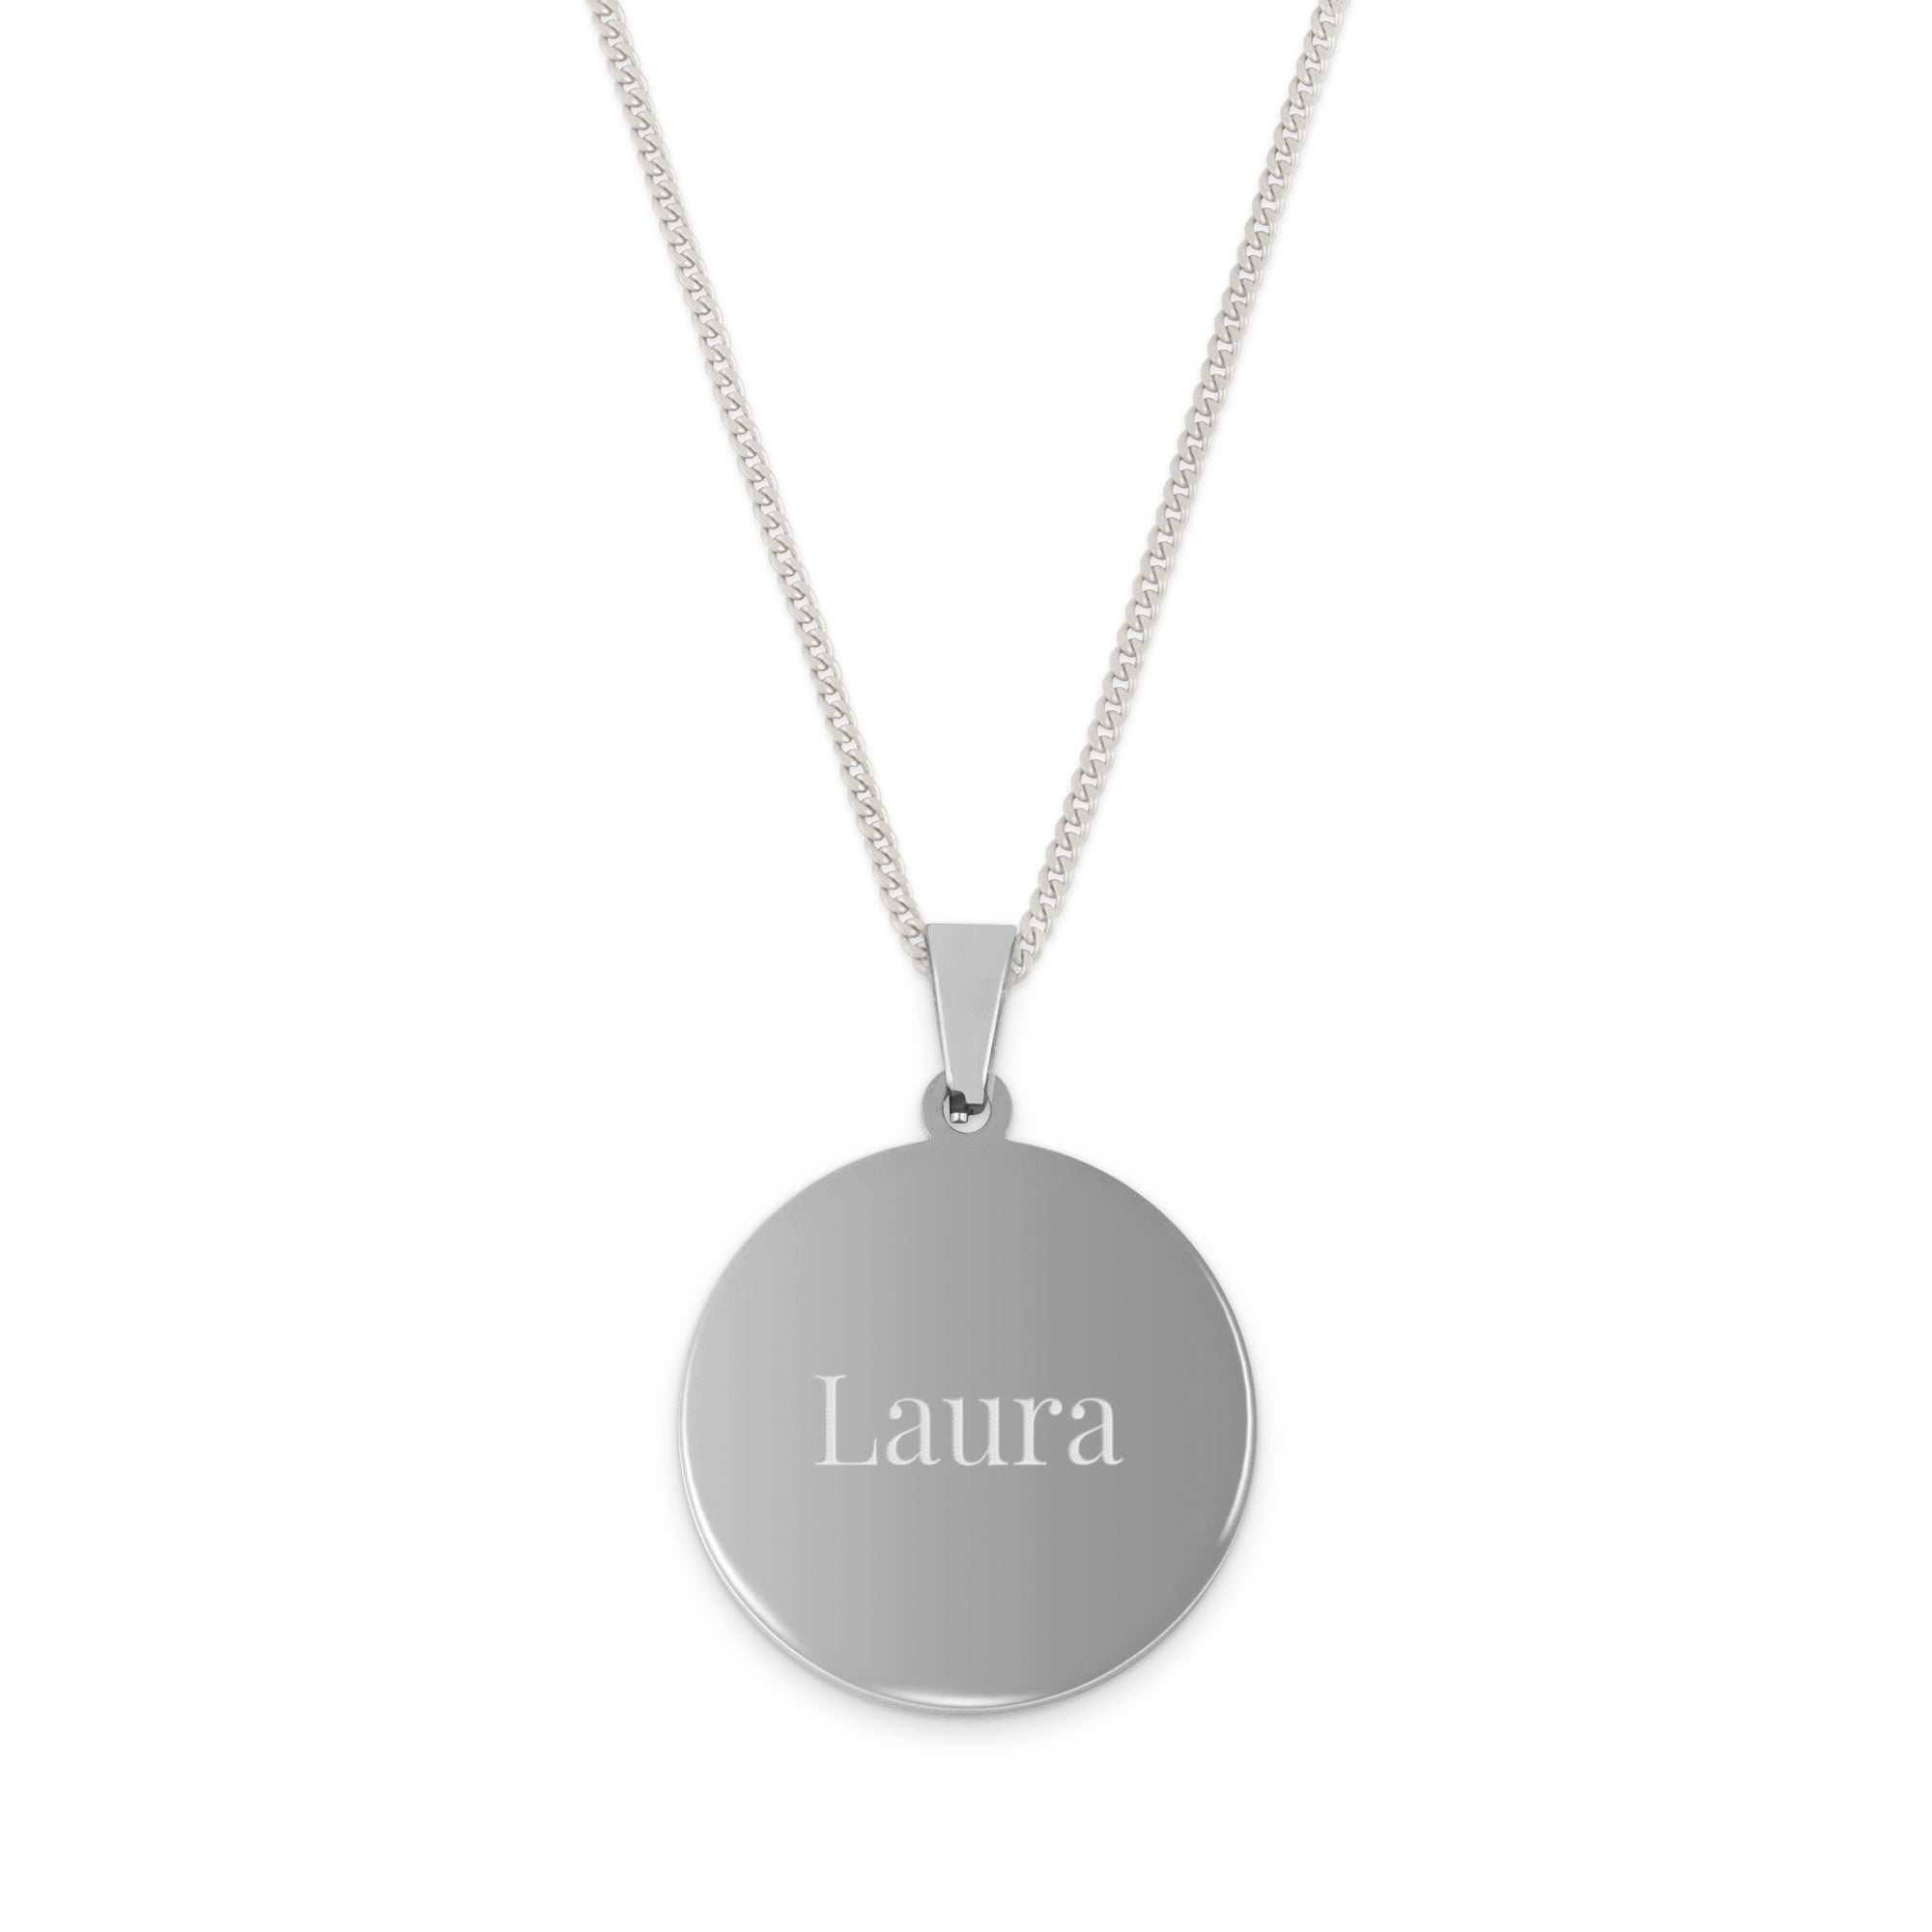 Necklace round pendant with text - Silver